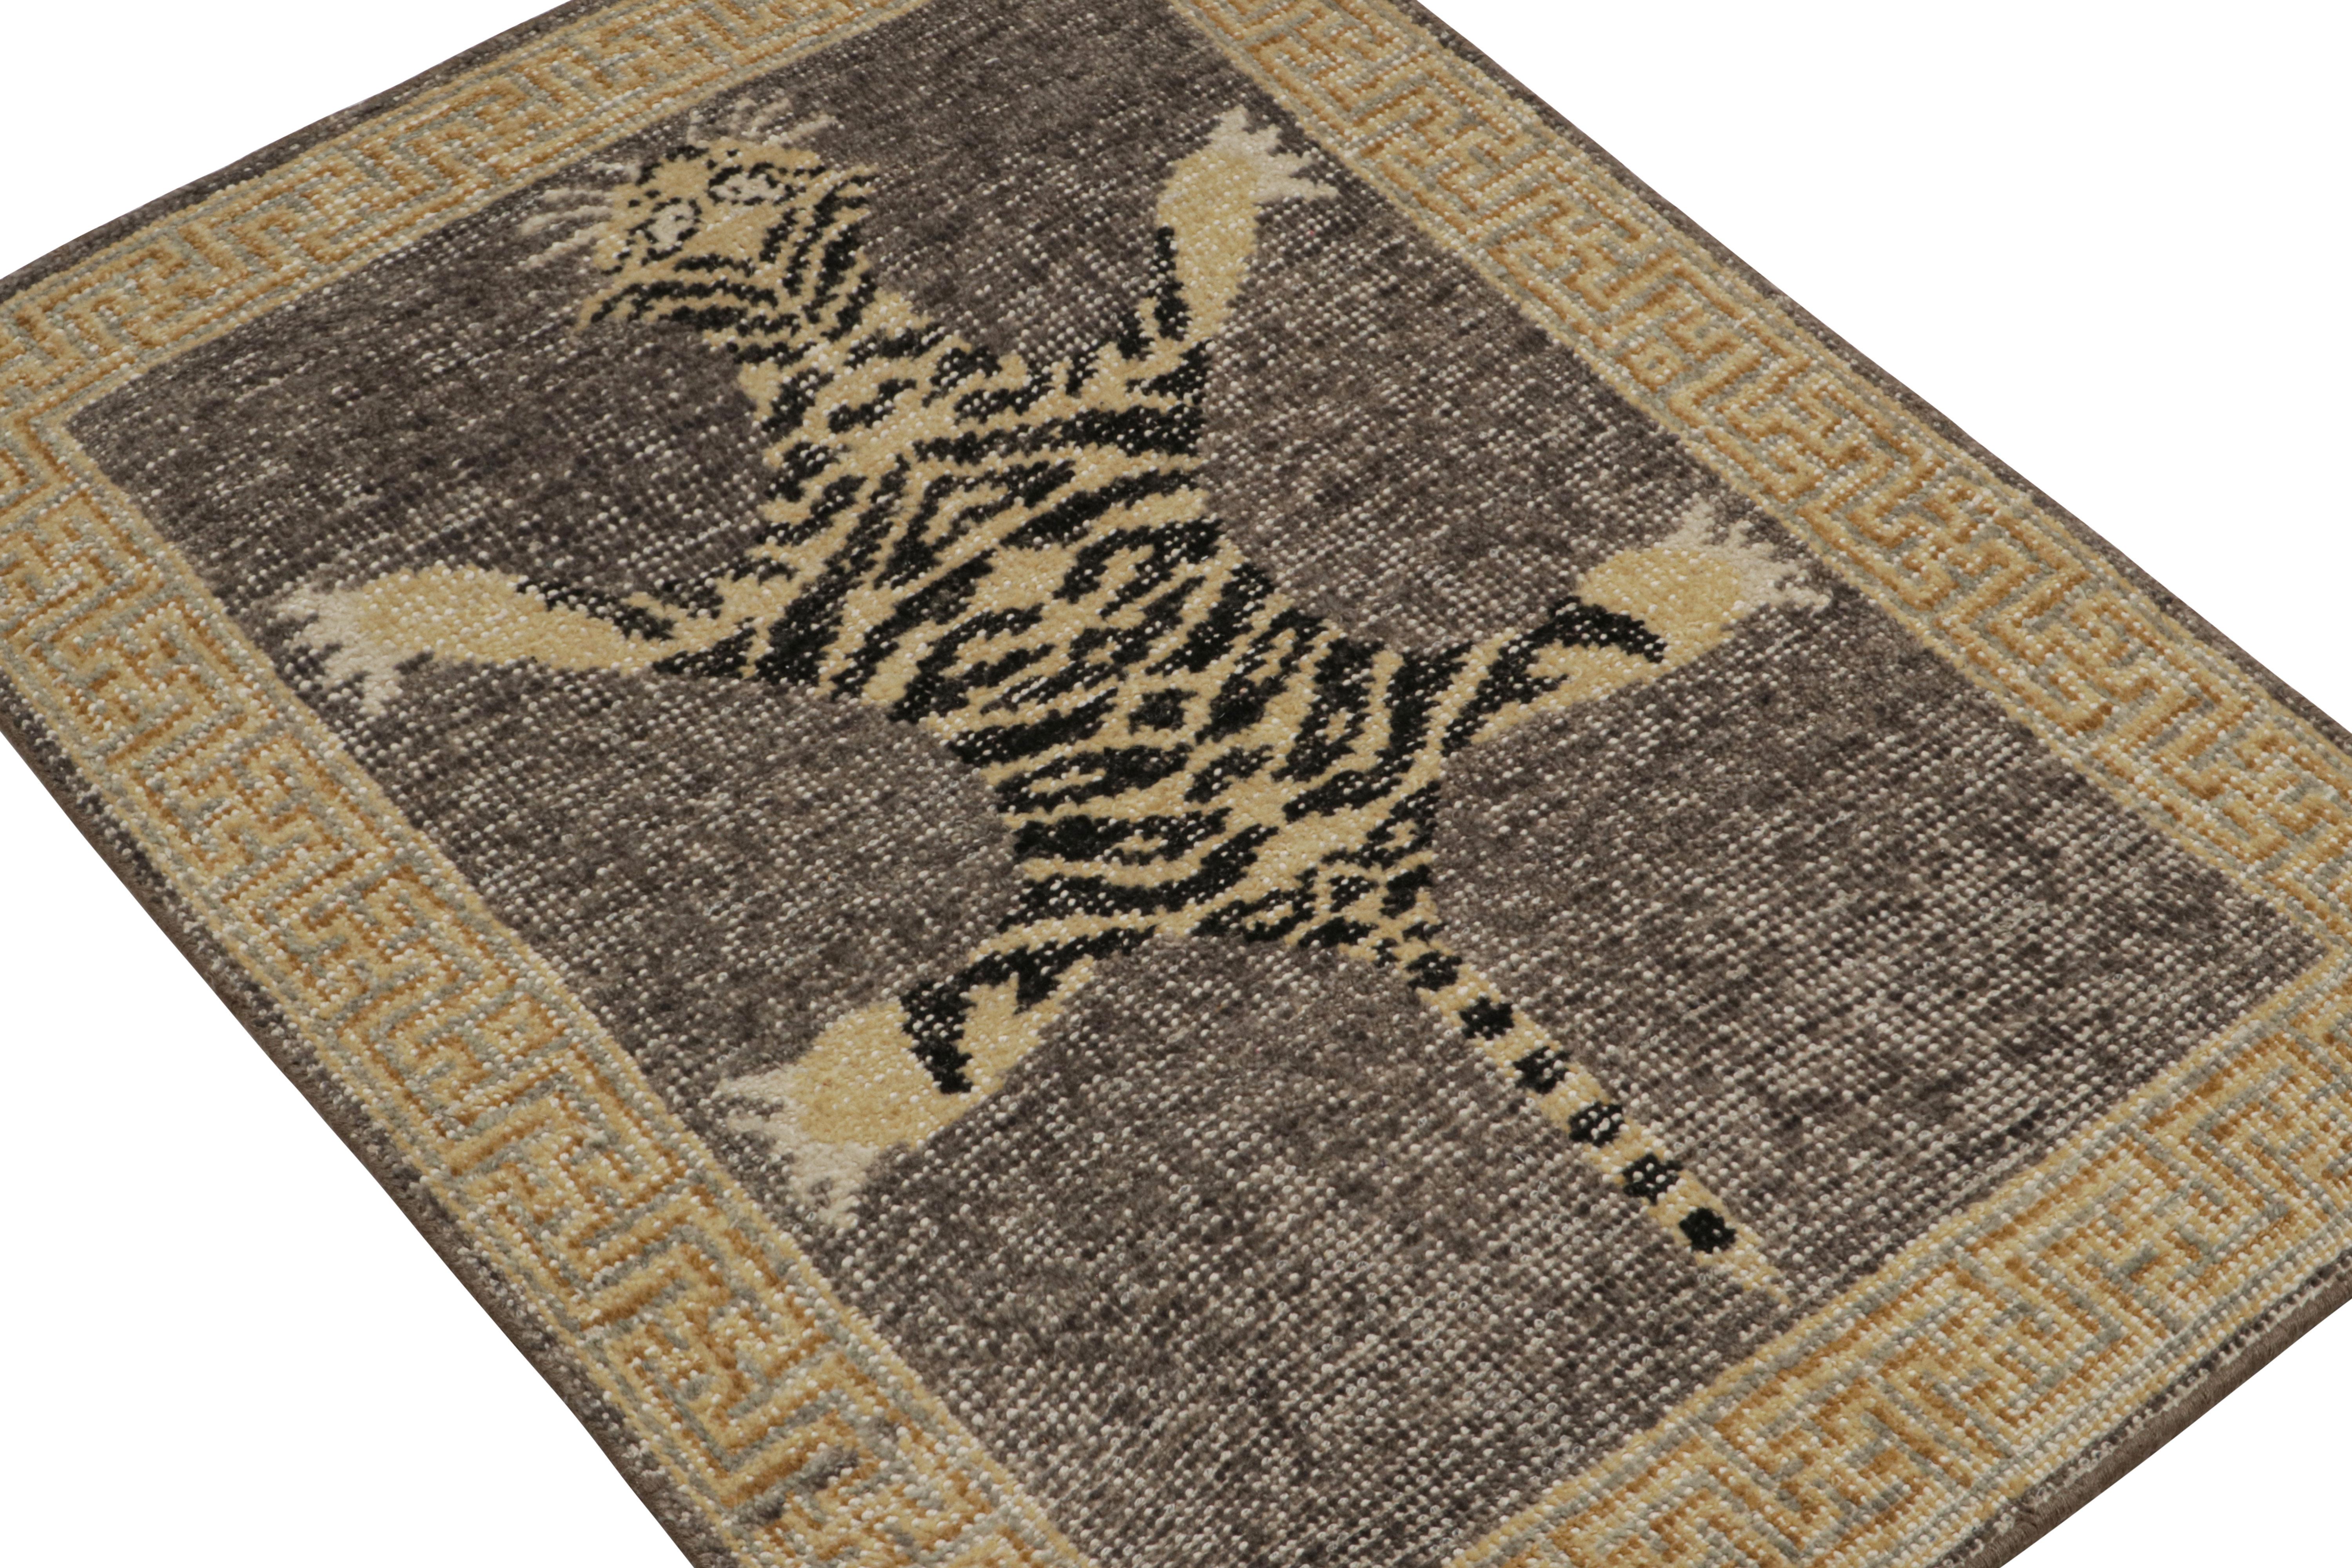 Rug & Kilim’s Modern Tiger Skin Accent Pictorial Rug Design in Gray, Beige and Black 
Description: Hand-knotted in wool, this 2x3 modern tiger pictorial rug features a vibrant colorway of gray, beige and black tones. 

On the Design: 

Hand-knotted